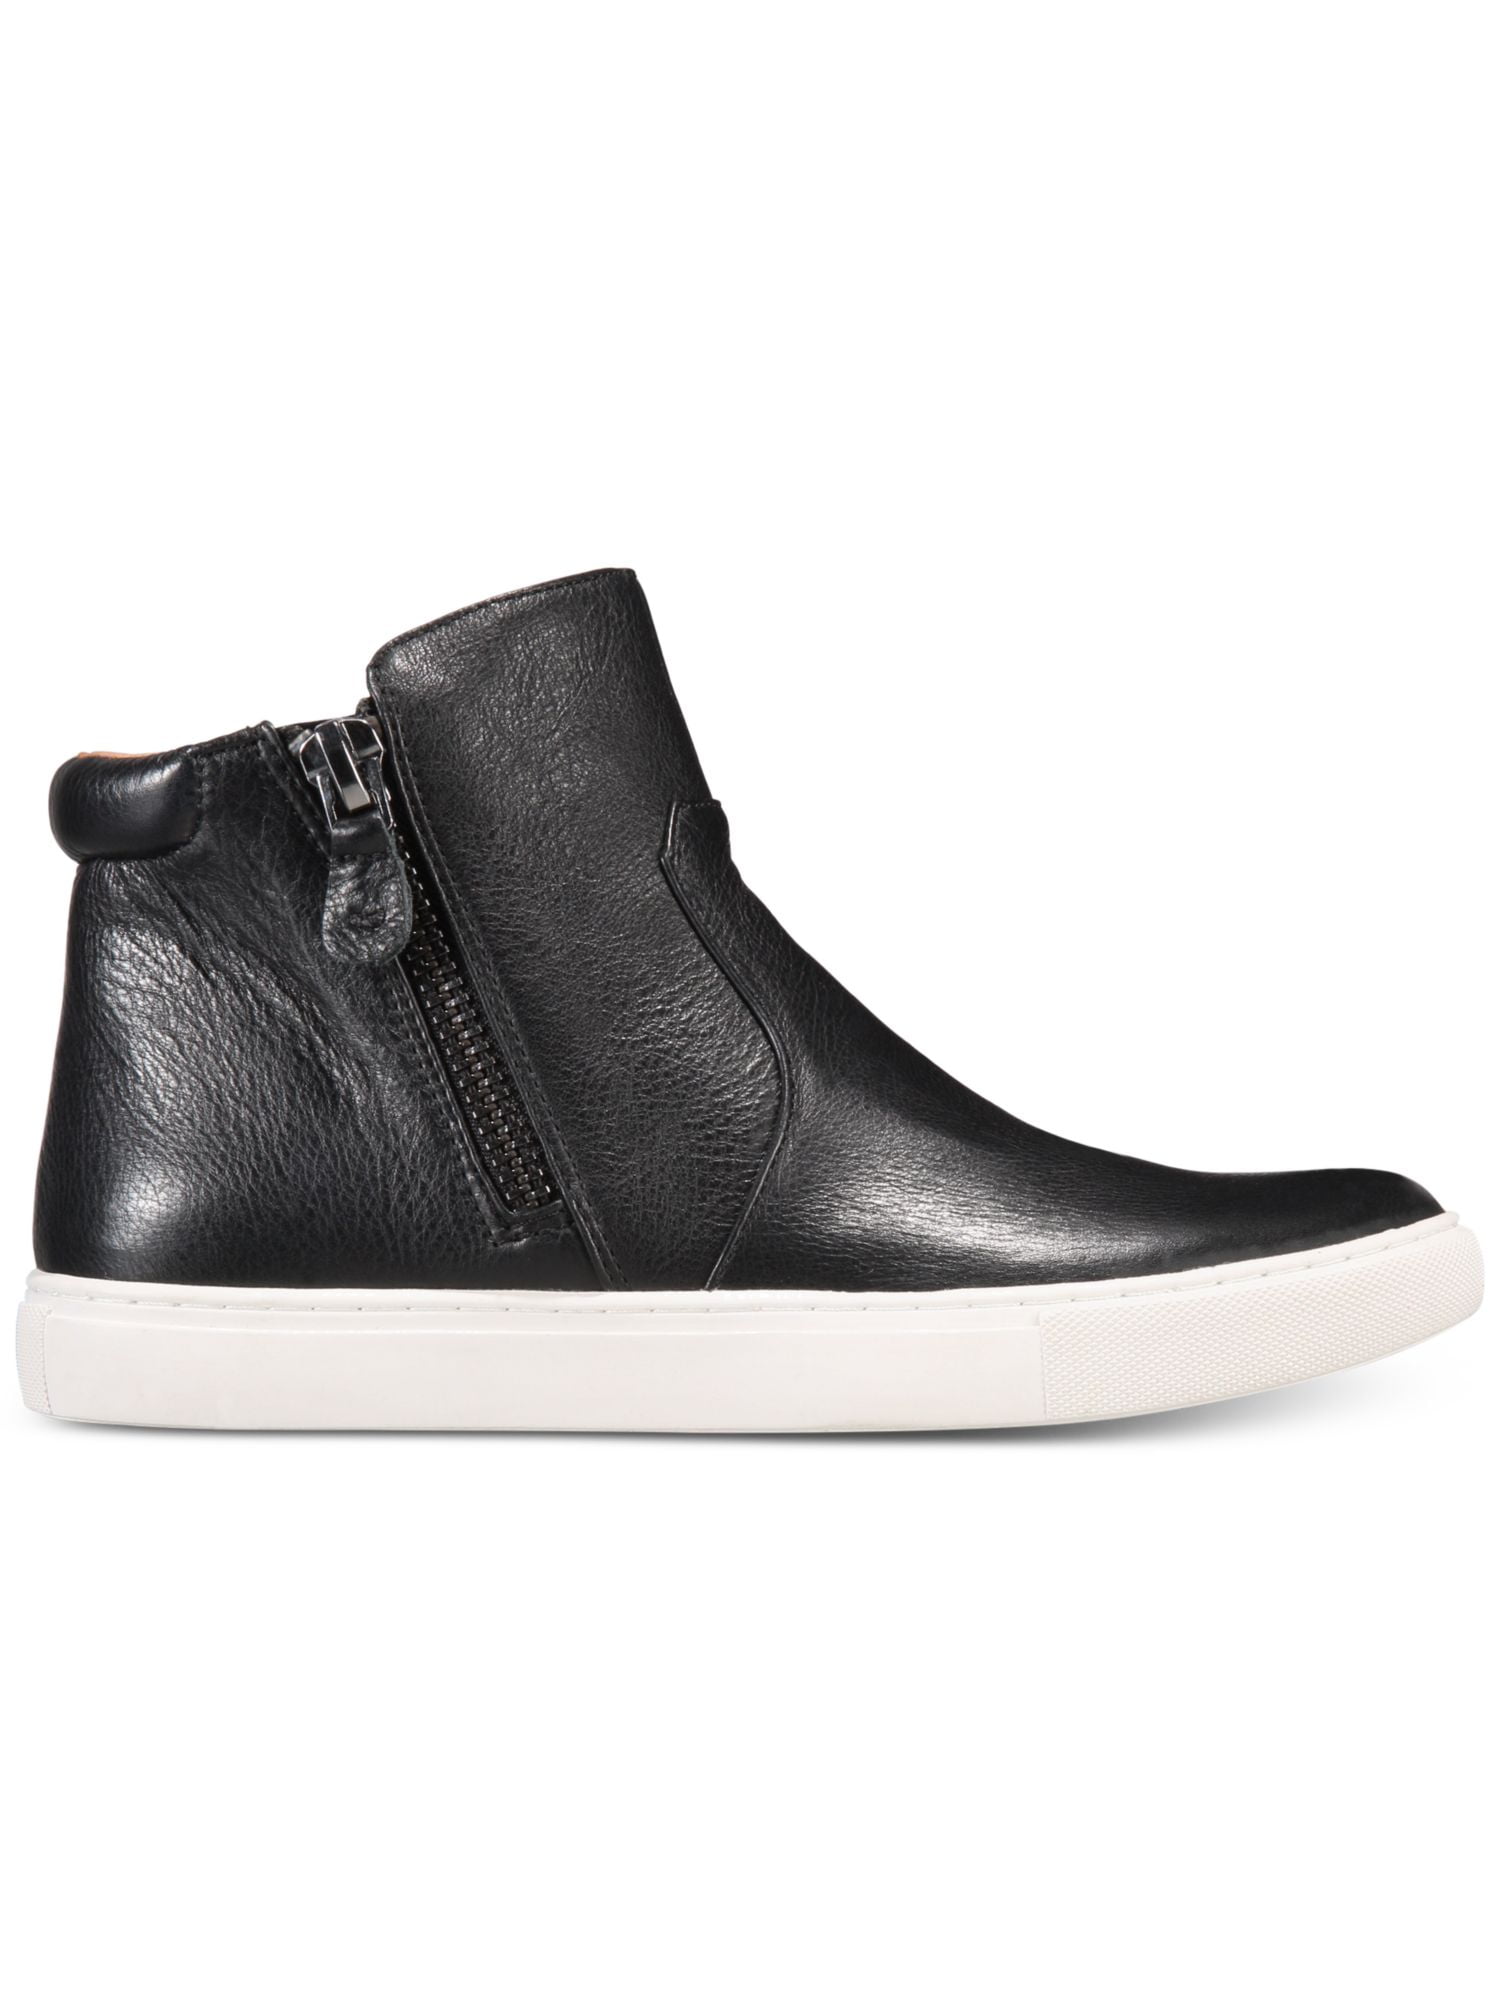 Kenneth Cole Real Deal Boots, Baby Boys - Macy's